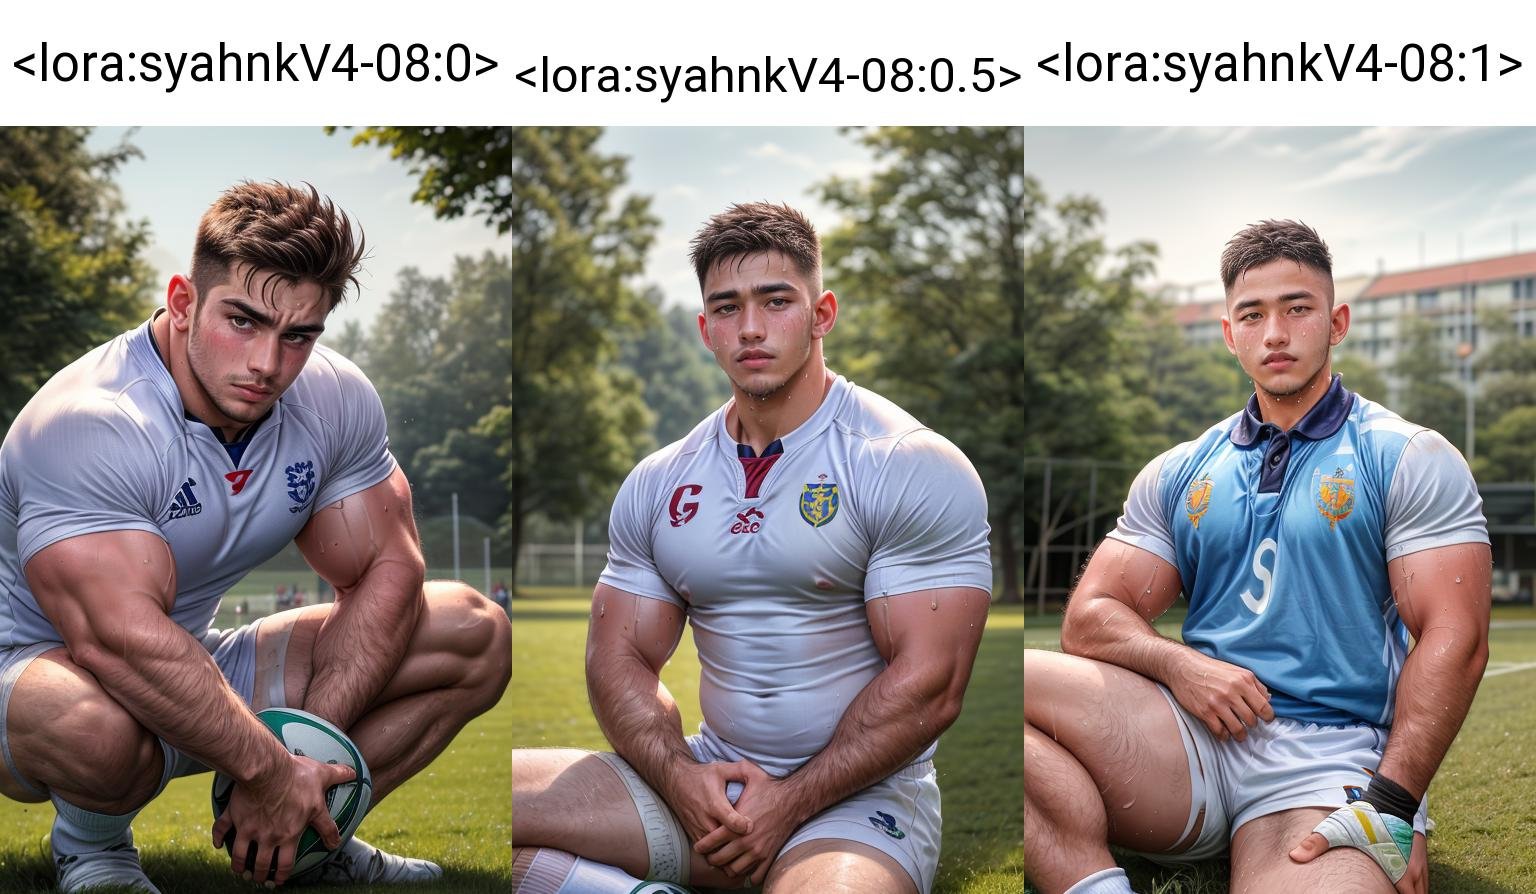 masterpiece, best quality, highres, realistic, handsome, photogenic, big muscles,<lora:syahnkV4-08:0>, syahnk, as ( a 20 years old  man, (chav,pecs),muscular male,(wearing long white socks), looking at viewer, (best quality, masterpiece, high res, hdr:1.2), detailed face, upper body, (sweaty),(wearing rugby uniform),sweaty, bokeh) ,<lora:add_detail:1>